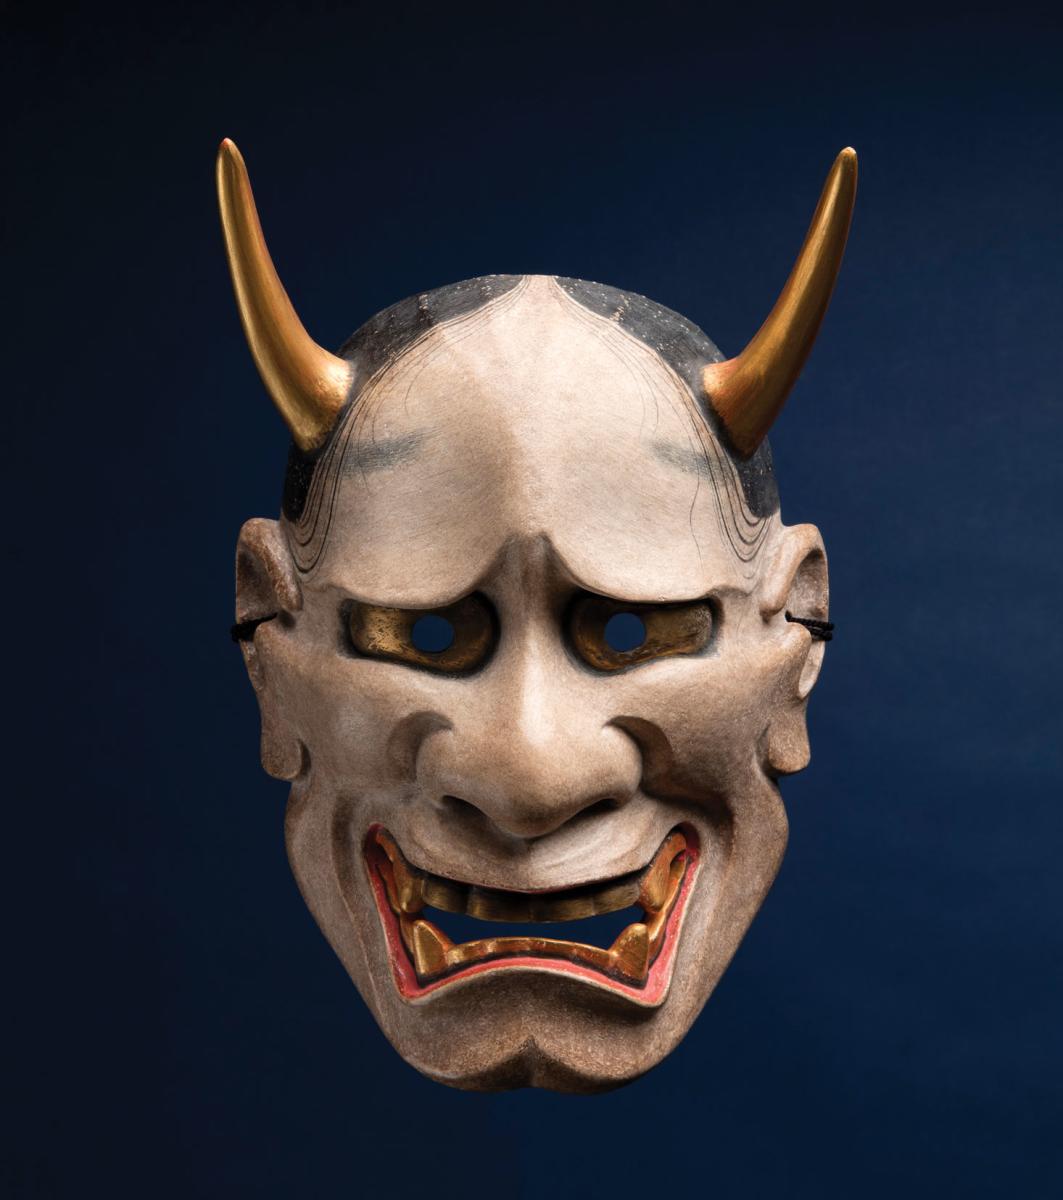 This Noh mask, featuring a female demon or hannya, embodies rage, anger and sadness.